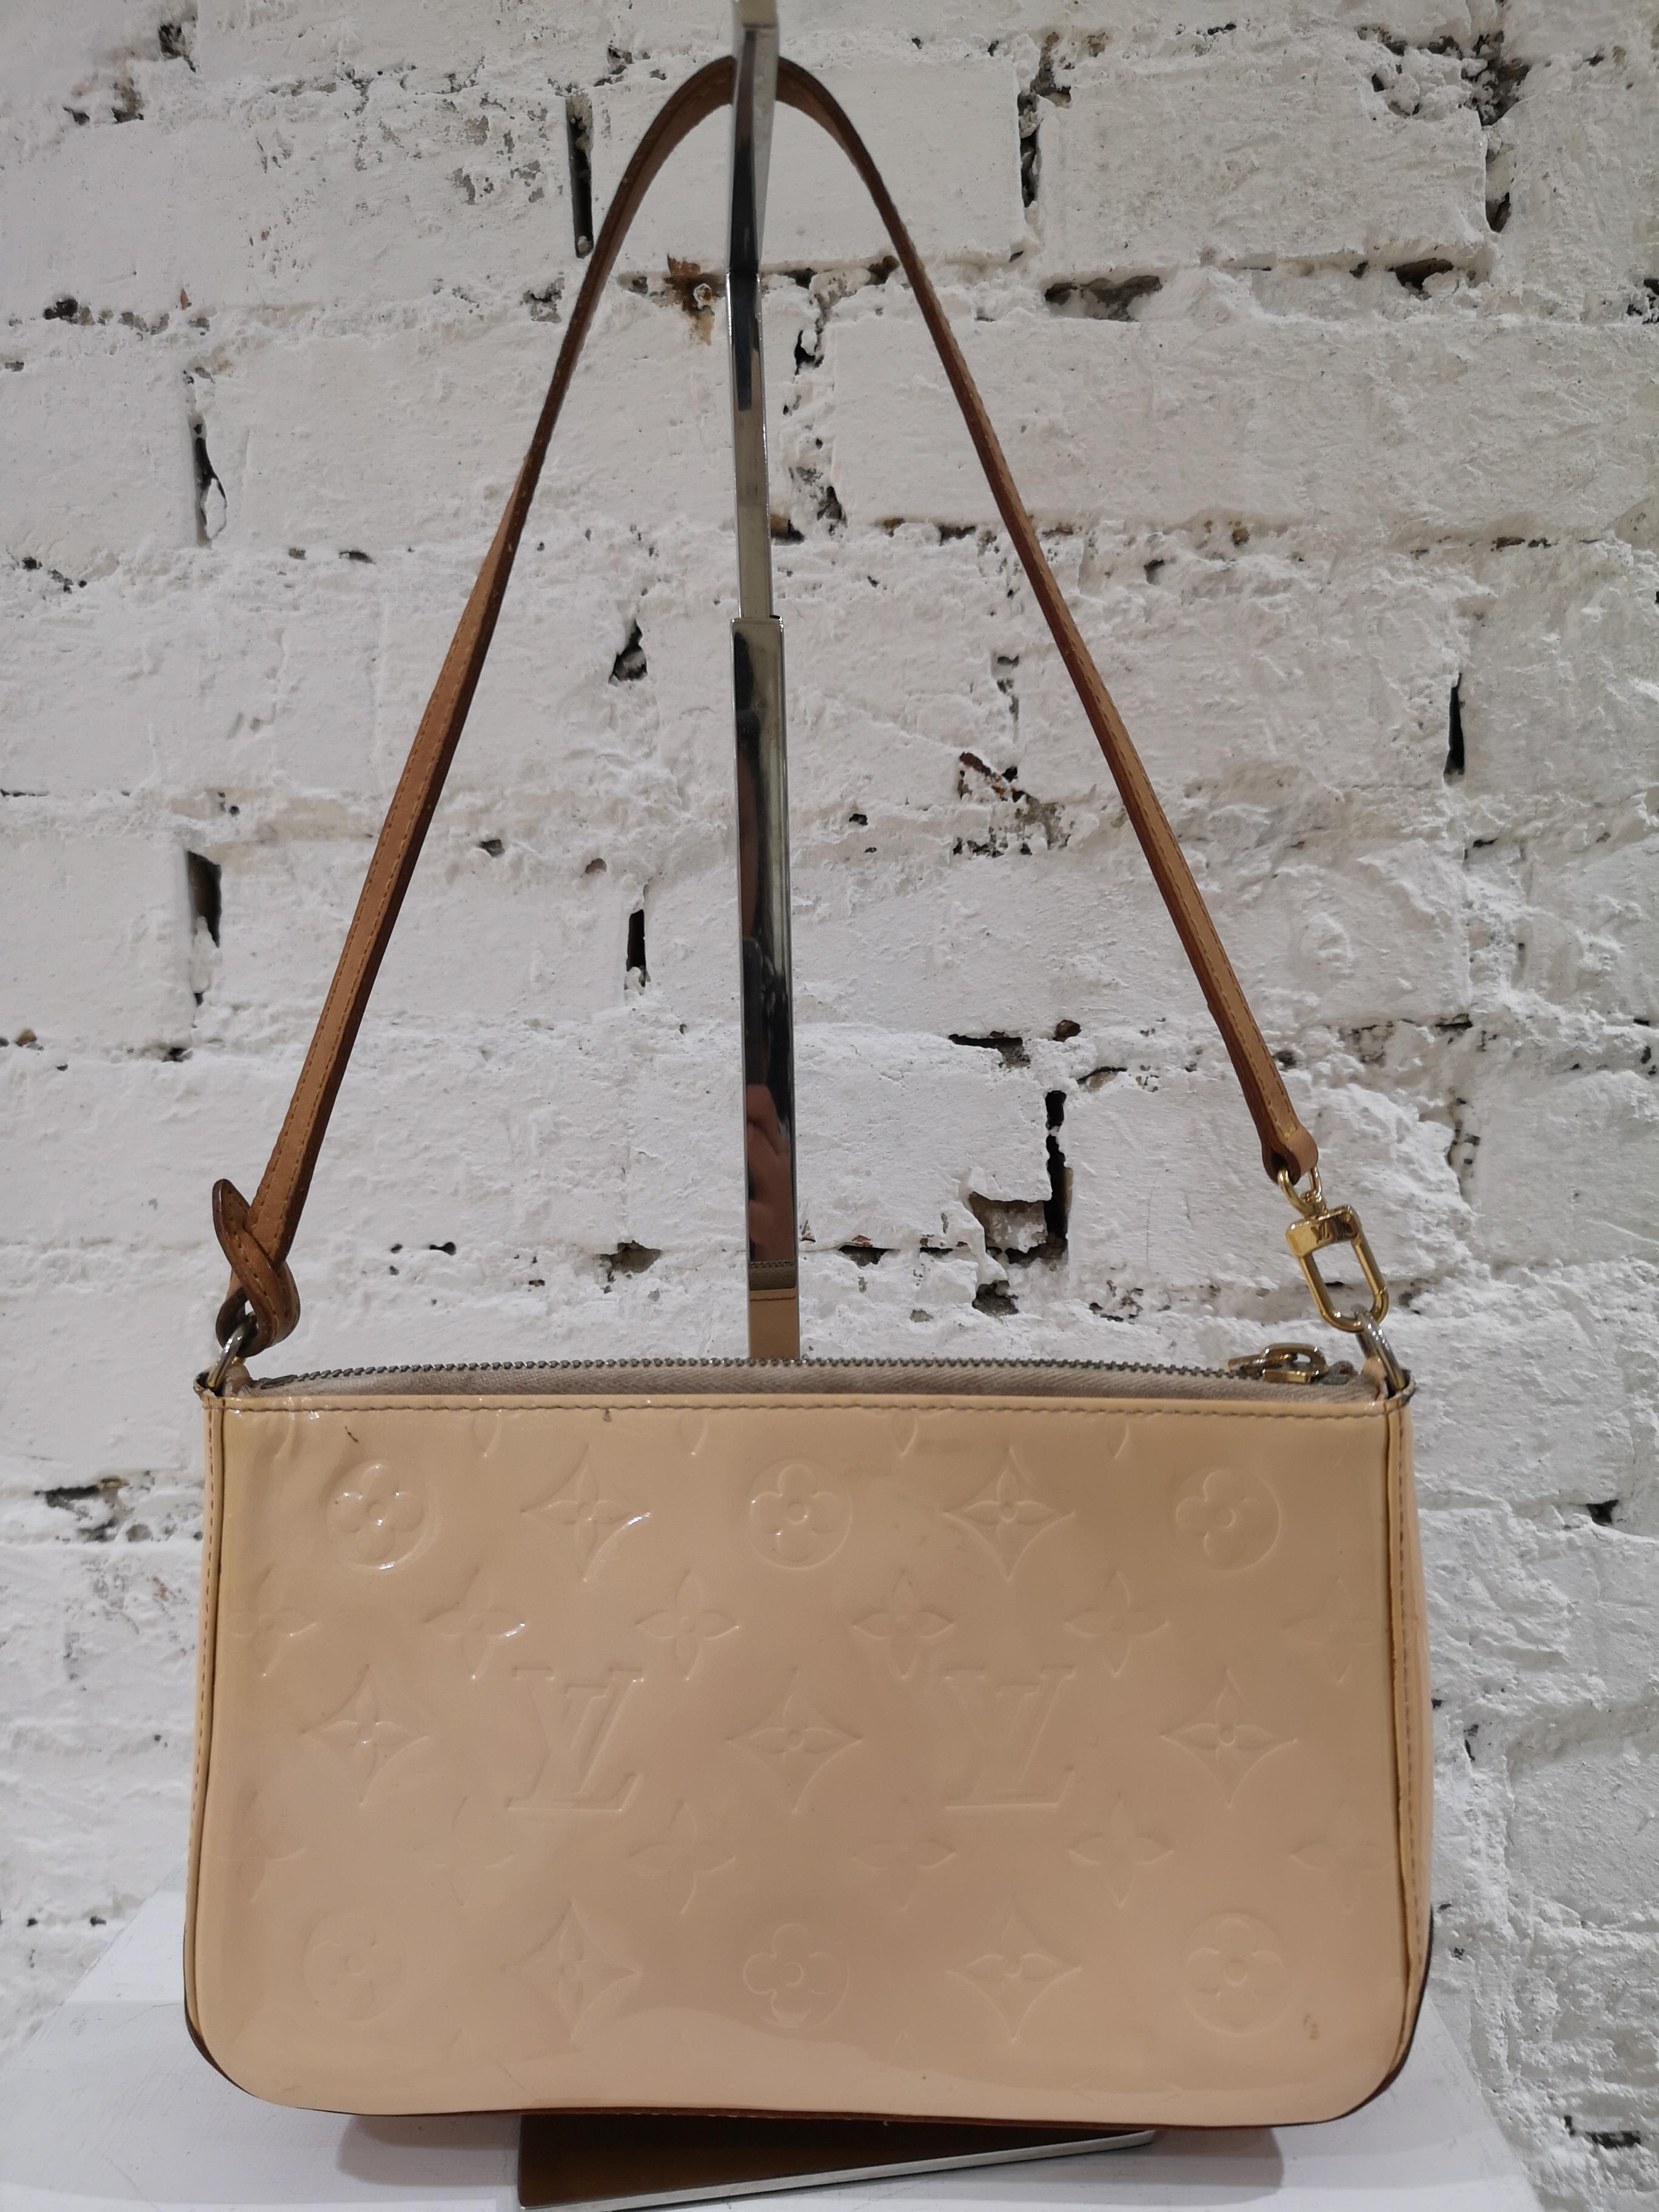 Nude Louis Vuitton Bag - For Sale on 1stDibs  nude lv bag, louis vuitton  bag nude, lv nude bag